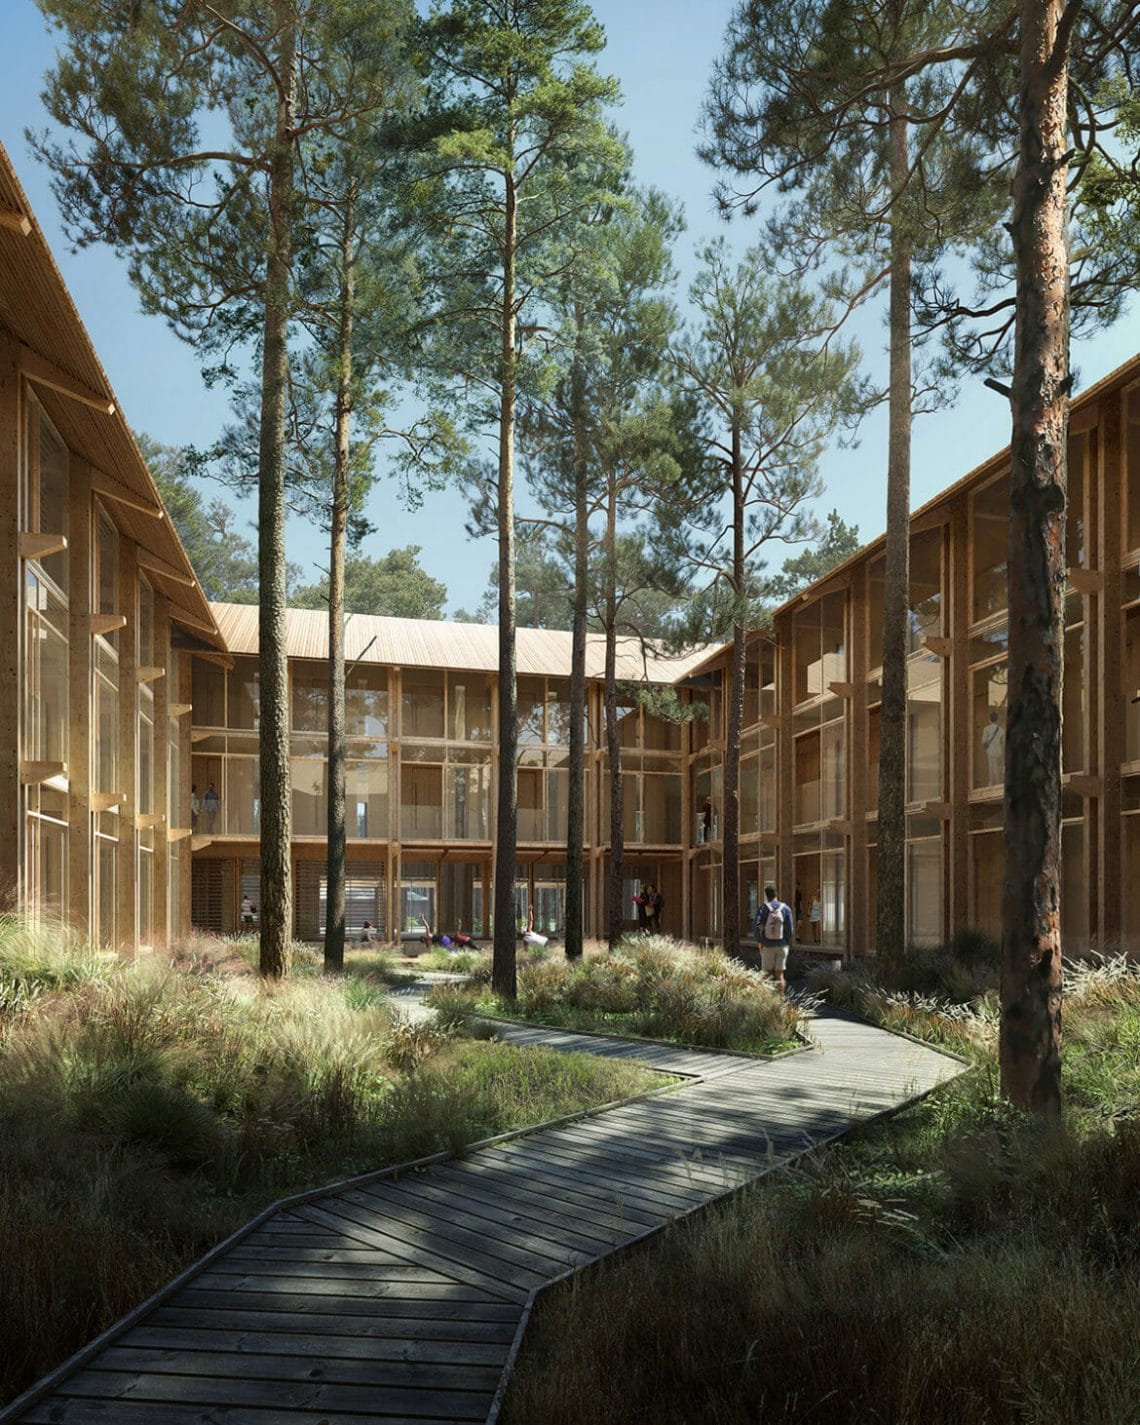 Älvdans: a Hotel and Spa amidst the forests of Sweden